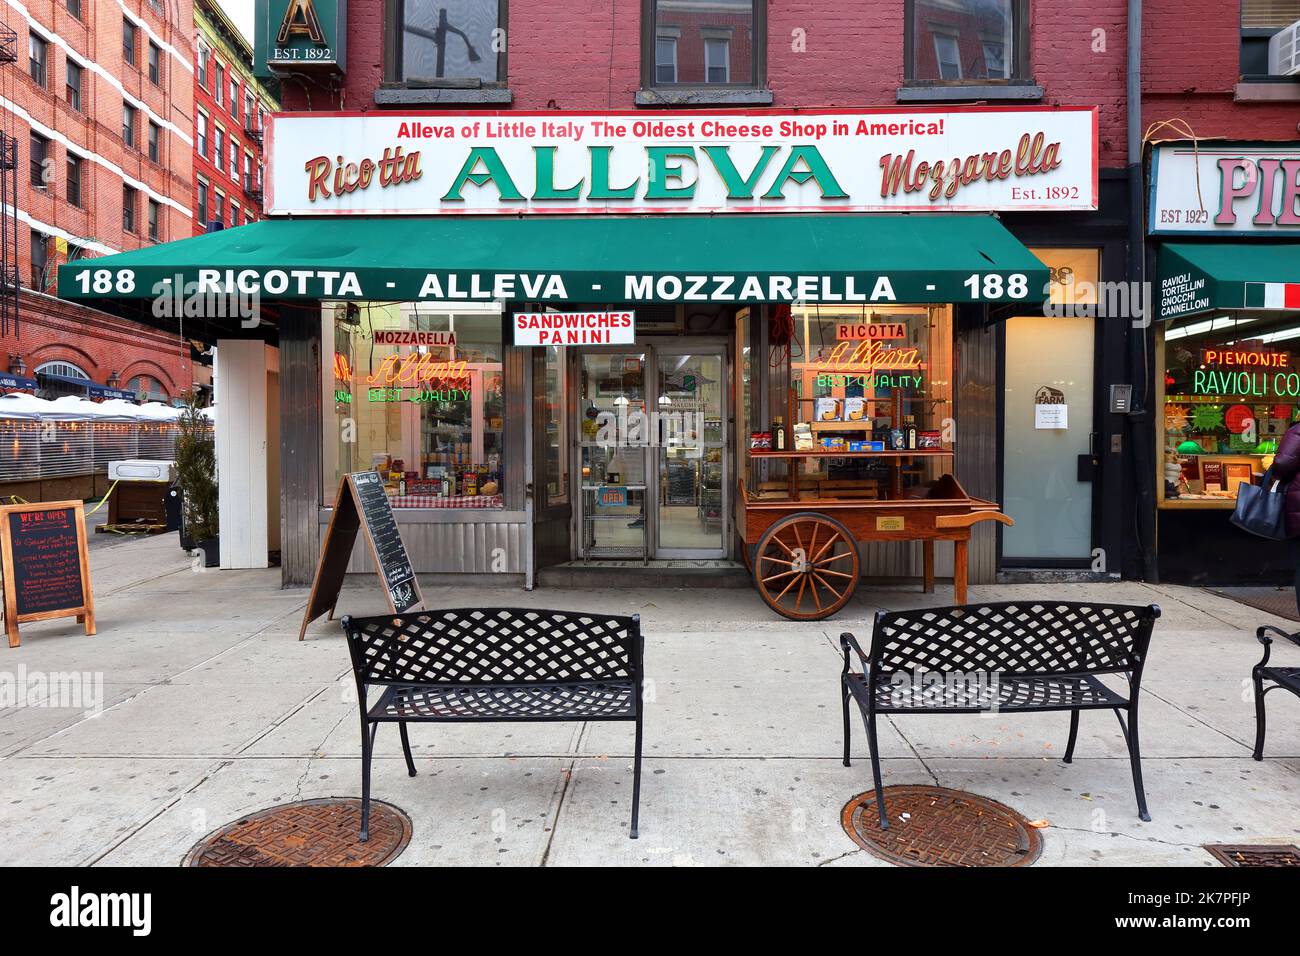 [historical storefront] Alleva Dairy, 188 Grand St, New York, NYC storefront photo of a cheese store in Manhattan's Little Italy neighborhood. Stock Photo